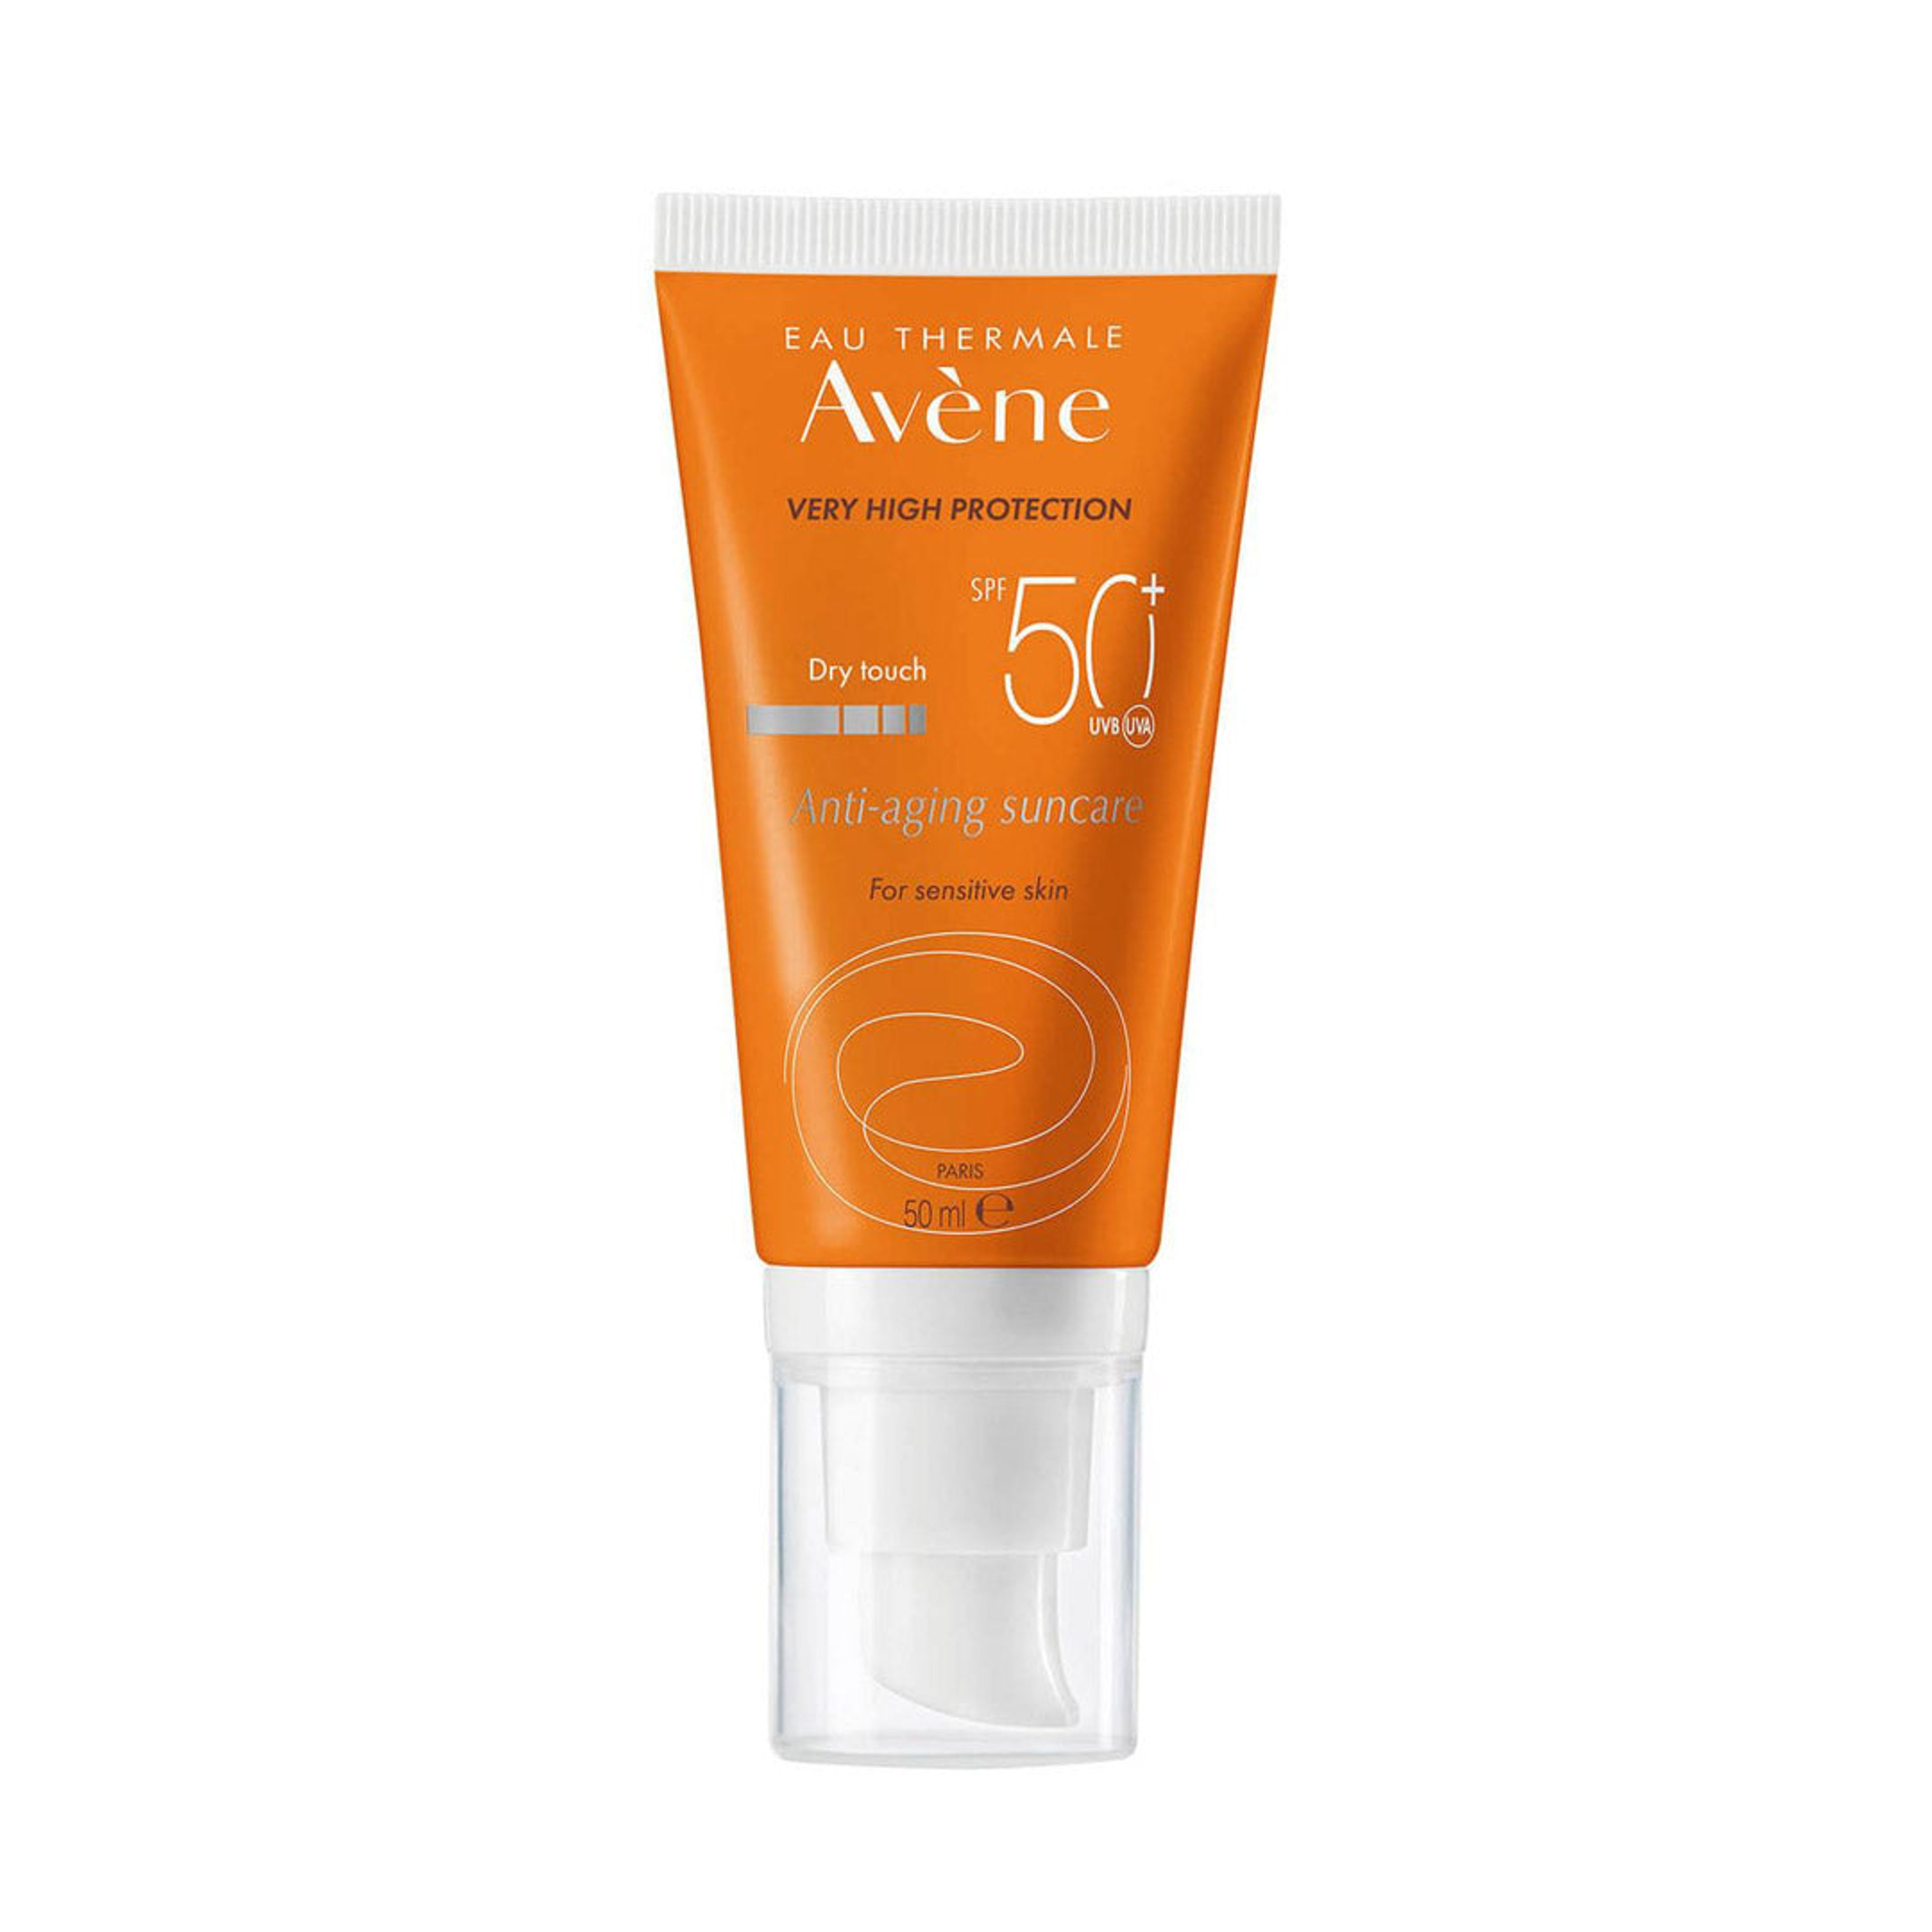 Very High Protection Anti-ageing SPF50+ Sun Cream for Sensitive Skin